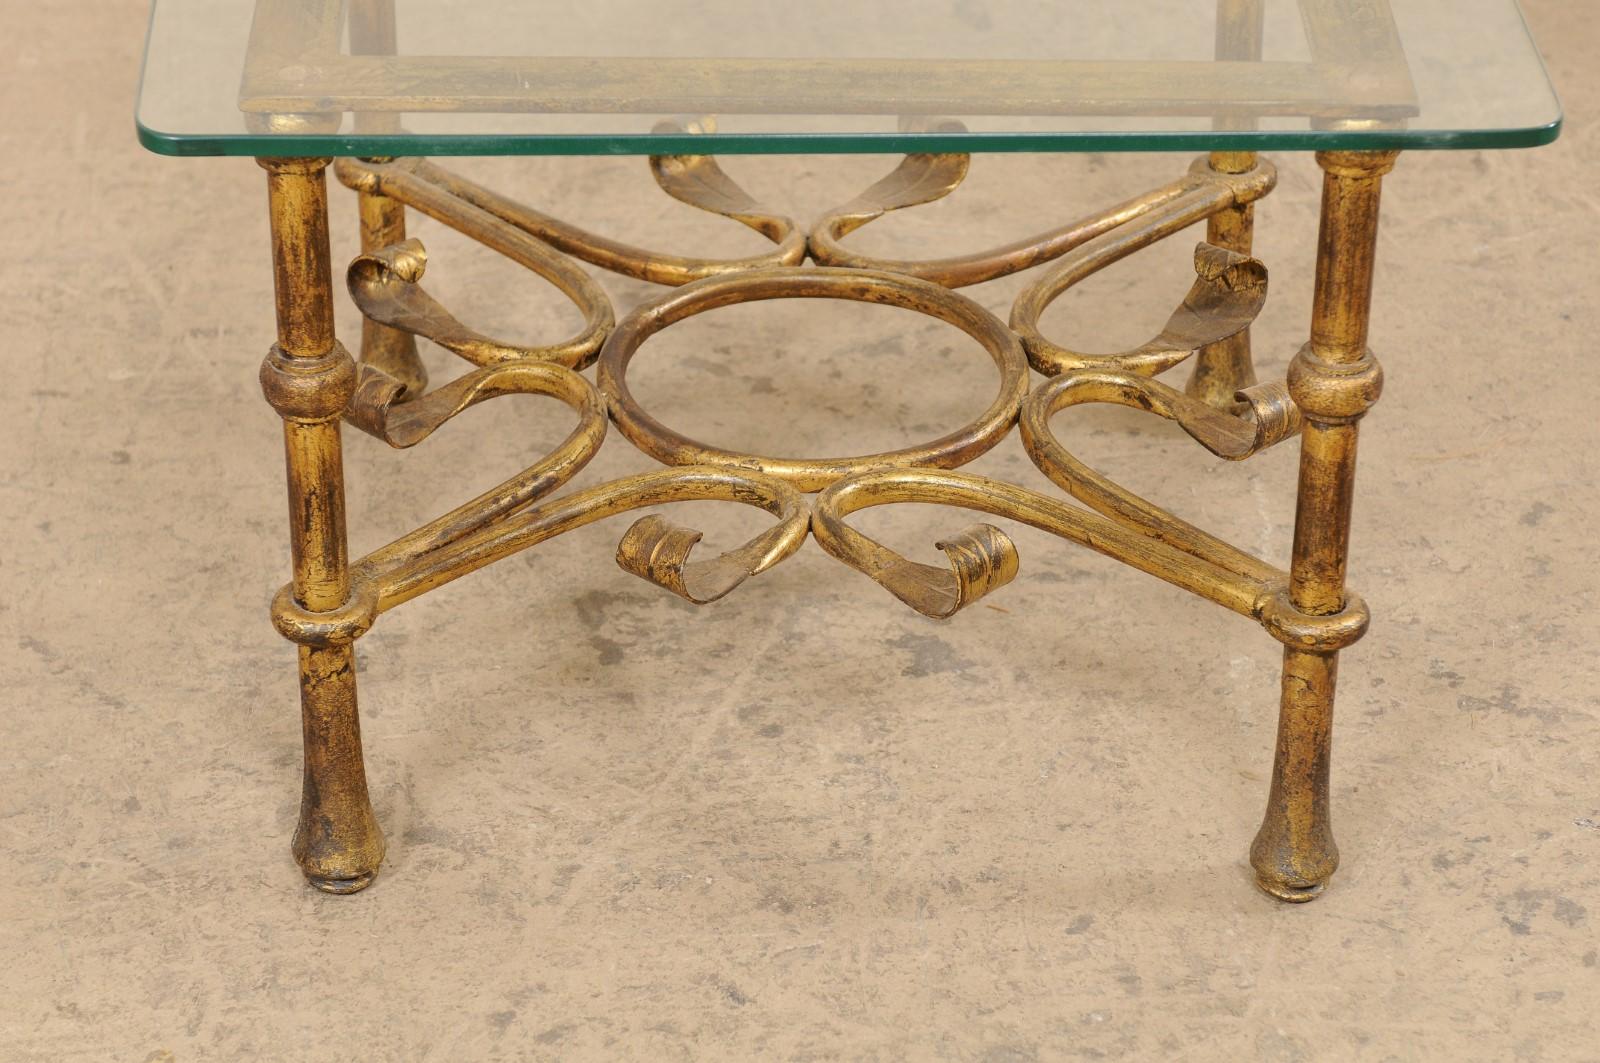 Spanish Accent Table with Gilt Iron Base & Square-Shaped Glass Top, Mid 20th C. For Sale 2